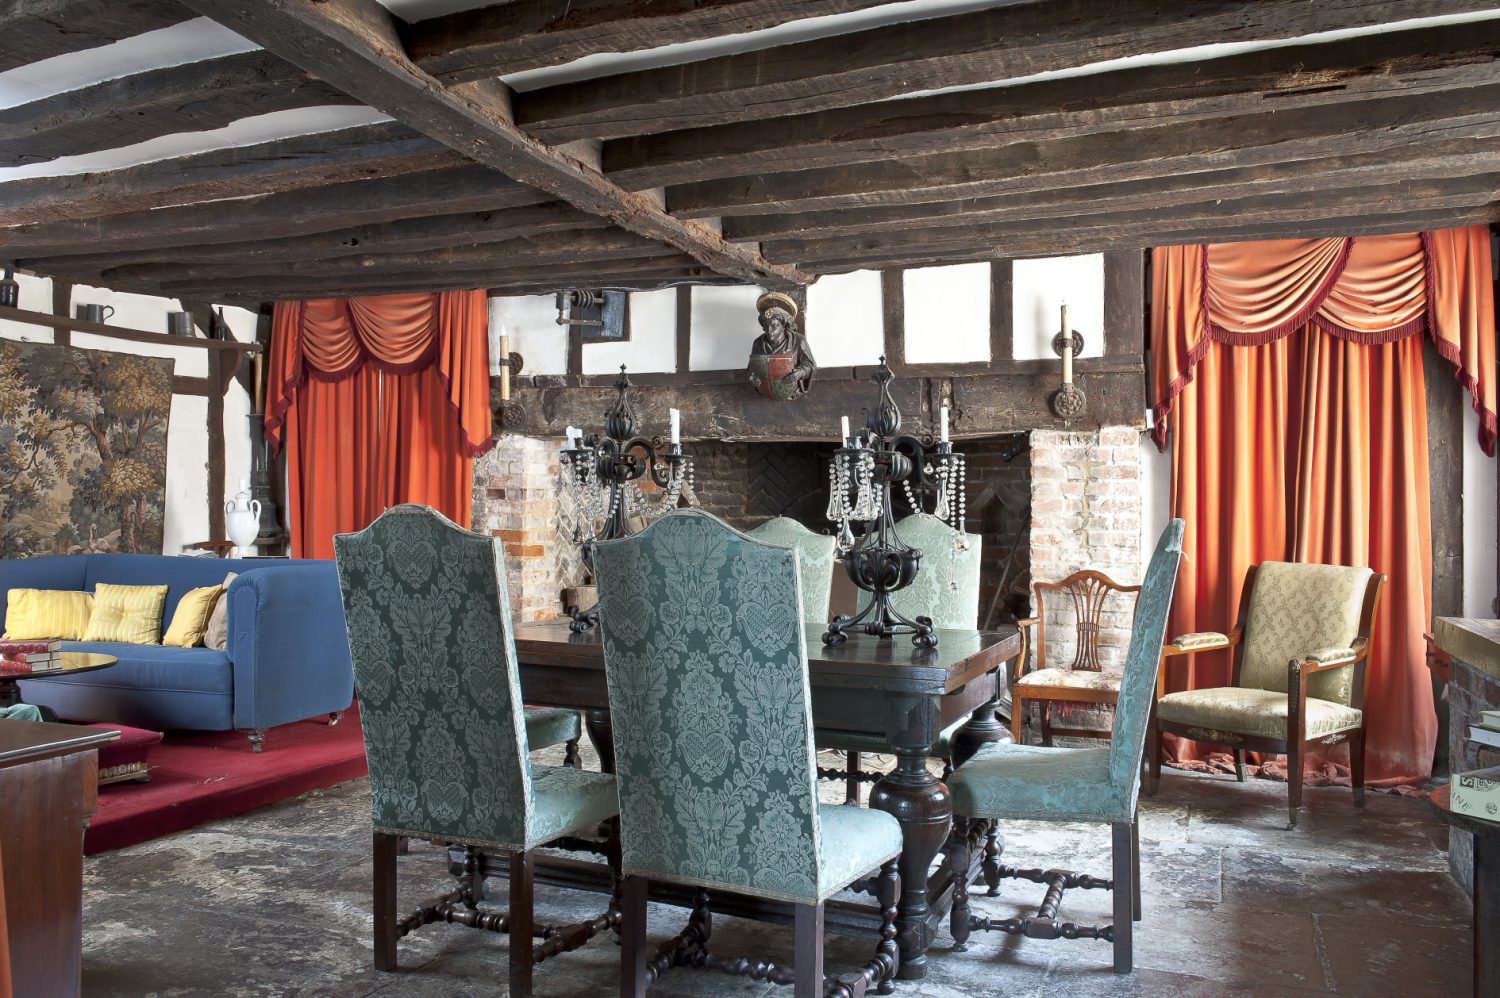 Doors from the hallway lead into a low-beamed dining room with an enormous inglenook fireplace